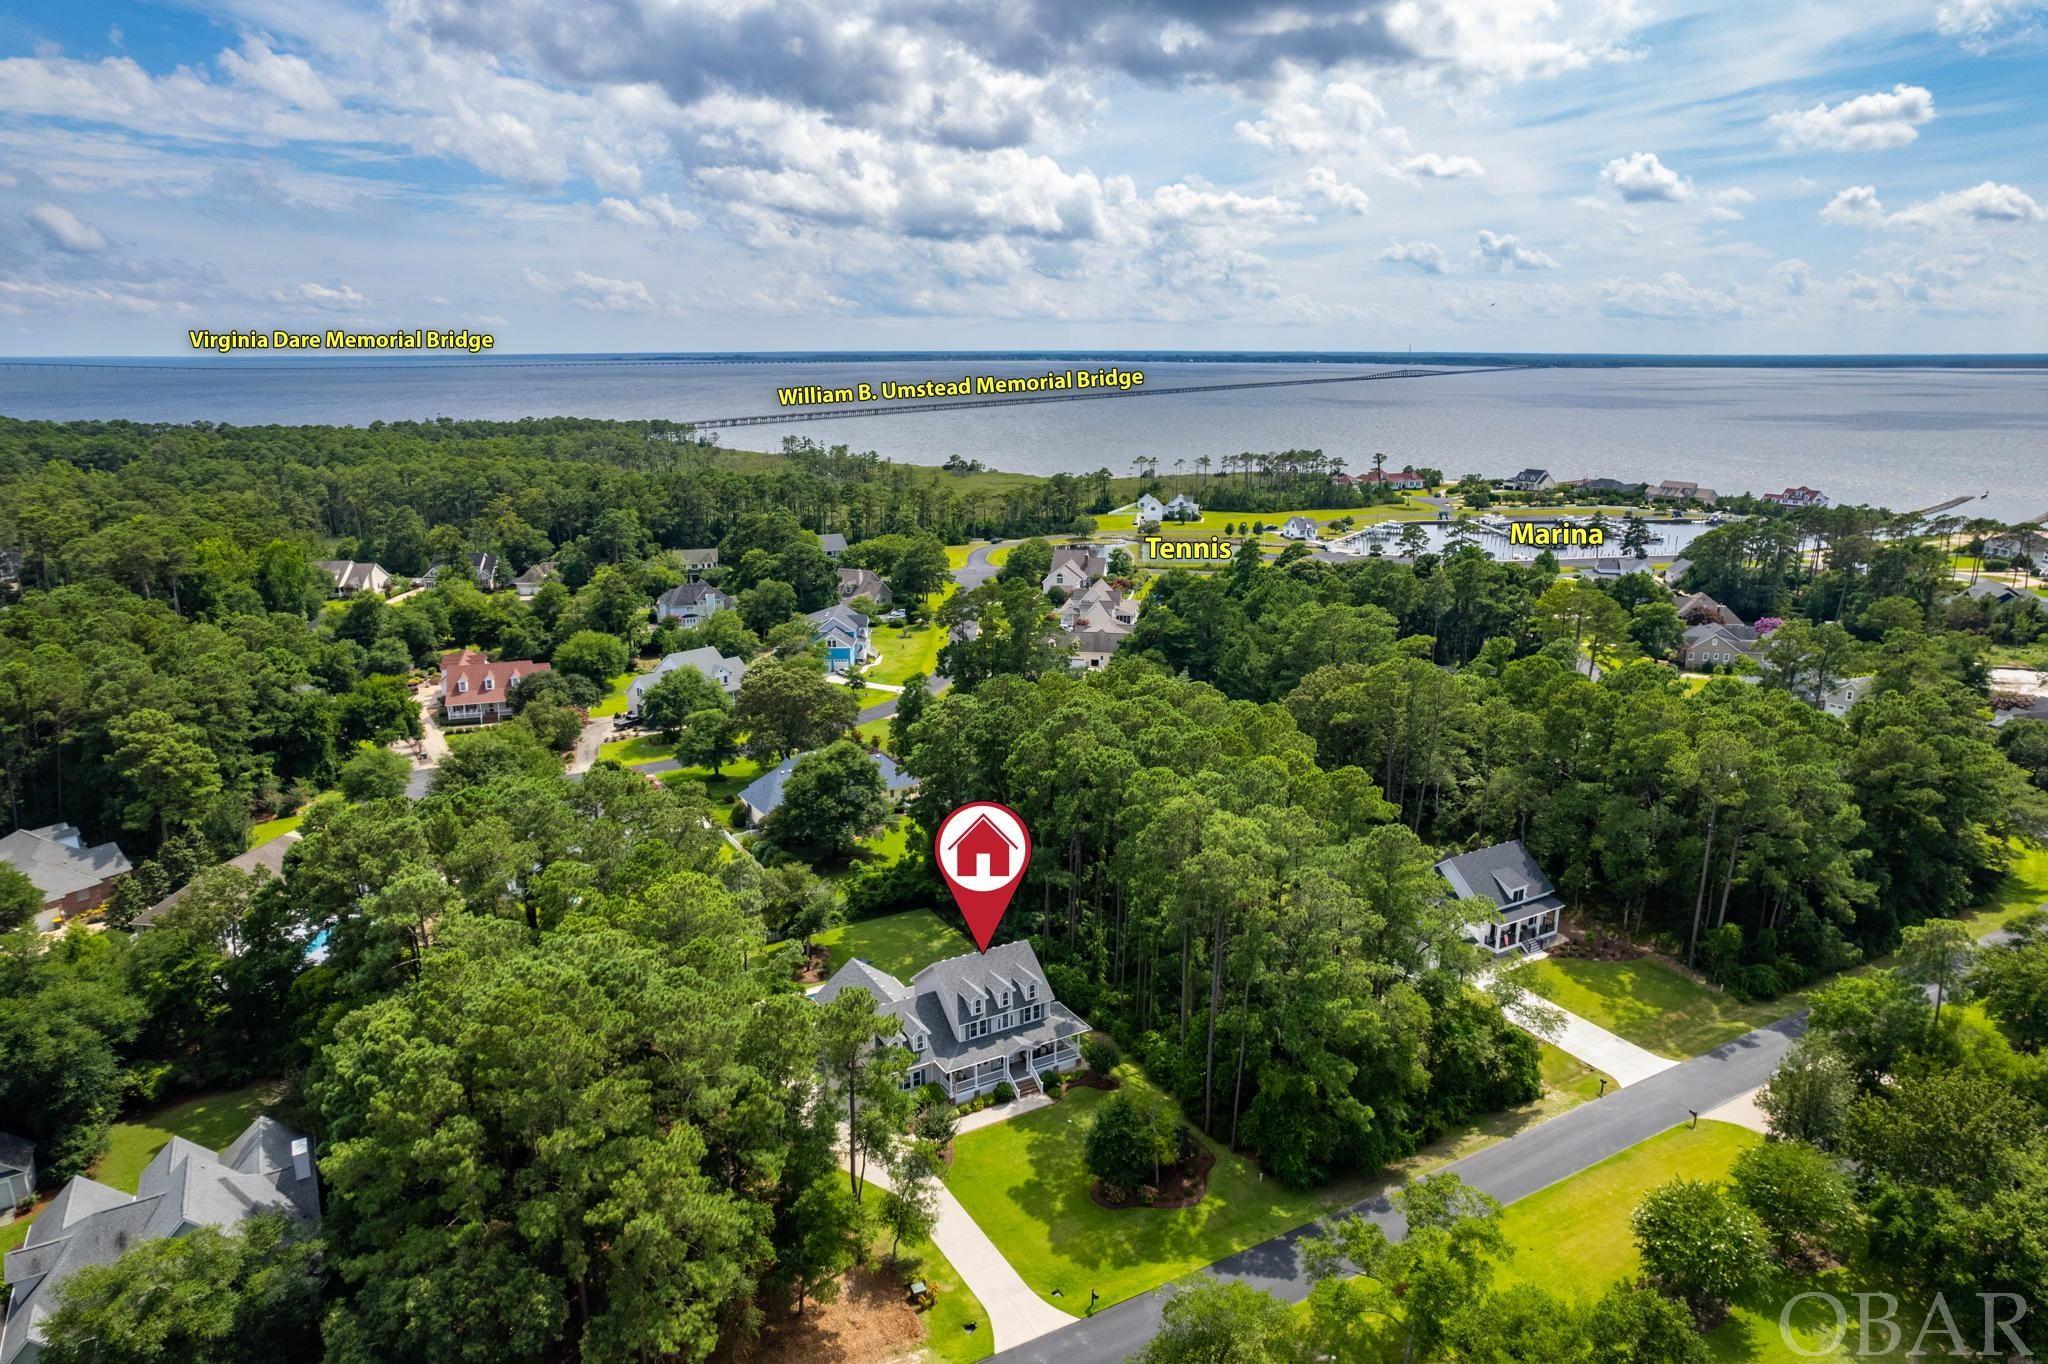 Presenting a true champion of quality in this 100%, Turn-key Heritage Point home located at 112 Weir Point in the quiet North End of Manteo NC. It’s exquisite appeal and design were Engineered with a mindset of creating a home of absolute efficiency and quality with a flair for perfection in every step you take. A 2015 build by renowned Manteo builder Bobby Etheridge may as well be 2022 as the standard of maintenance and care is astounding from the Floors to the Ceiling. 2x6 walls, Fiberglass Vinyl clad doors & Windows, PVC trim…the list goes on. The Curb appeal shows the meticulous nature of the owner’s daily care, with Irrigated Zoysia Sod and curved flower beds commanding your attention all while accentuated by a brick edged walkway with Native plant species. The Exterior of the home is luxurious in all aspects with Carolina Beaded Vinyl Siding, Radiance Timber tech rails, Trex decking and Fiberglass Columns creating a beauty that flows effortlessly from the covered porches into the Grand entry. The custom Thermatru three-tiered door, with Transom windows and Granite etched glass opens into a vast two-story entry with an open Foyer. Gravitating to the Old Towne Hickory hardwood, the incredible floor has rich character and is accentuated by the homes soft palette of inviting wall colors. This home is inviting and the floor plan was designed for open flow and comfortable living while keeping Natural light at a maximum in all of the Simonton Platinum tilt windows. The large living room offers a Gas Fireplace and built-in shelving, beaded back board and custom window seats. Craftsman trim work includes 6” crown molding, encapsulated bead board, wainscoting and intricate patterned woodwork that adorns the entire home. Look into this dreamy Kitchen with Custom 42” raised panel slow close cabinets, elevated Granite counters, Commercial gas stove, SS appliances and cabinet space for a large family. Functional beauty that bleeds over into the sizable stylish dining room. A groovy nook off the Kitchen is sure to be a popular spot for breakfast and reflection. The large En Suite has vaulted ceilings, Walk in closets and a bathroom fit for royalty with a walk in shower and stylish design. A Powder room, Utility room with sink and access to the huge 2.5 car epoxy coated garage finish off this level. Upstairs offers more flow with gorgeous picture windows creating ambient light over the wide hallways that flow into the 3 additional bedrooms, Full-hall bath and huge Multi-purpose room/Fifth bedroom with walk in closet/gym area. This space is the secondary living large family dreams are made of. A meticulous home with stylish features and grand living all finished with an Eight-foot Anderson rear door leading you into the rear covered and screened porch overlooking a backyard Oasis. A Brand new oversized concrete pool offering a heater and tanning ledge is out of this world. Finish the evening with an LED lightshow. The pool offers a smart control system, robotic vacuum and safety cover for ease of use. Rear Landscaping inspires the mind and has plenty of room for everyone including your four legged friends! Heritage point community offers a deep water Marina and a Boat slip for each owner with shore power. Top that off with tennis courts, workout space, a true Sound beach with Gazebo and Pier all overlooking our famous Outer Banks sunsets! Exquisite home in a Coastal location with amazing amenities make this the best Manteo home on the market. Stop what you are doing and make dreams a reality. This is a story worth creating and your mark is all that’s missing.